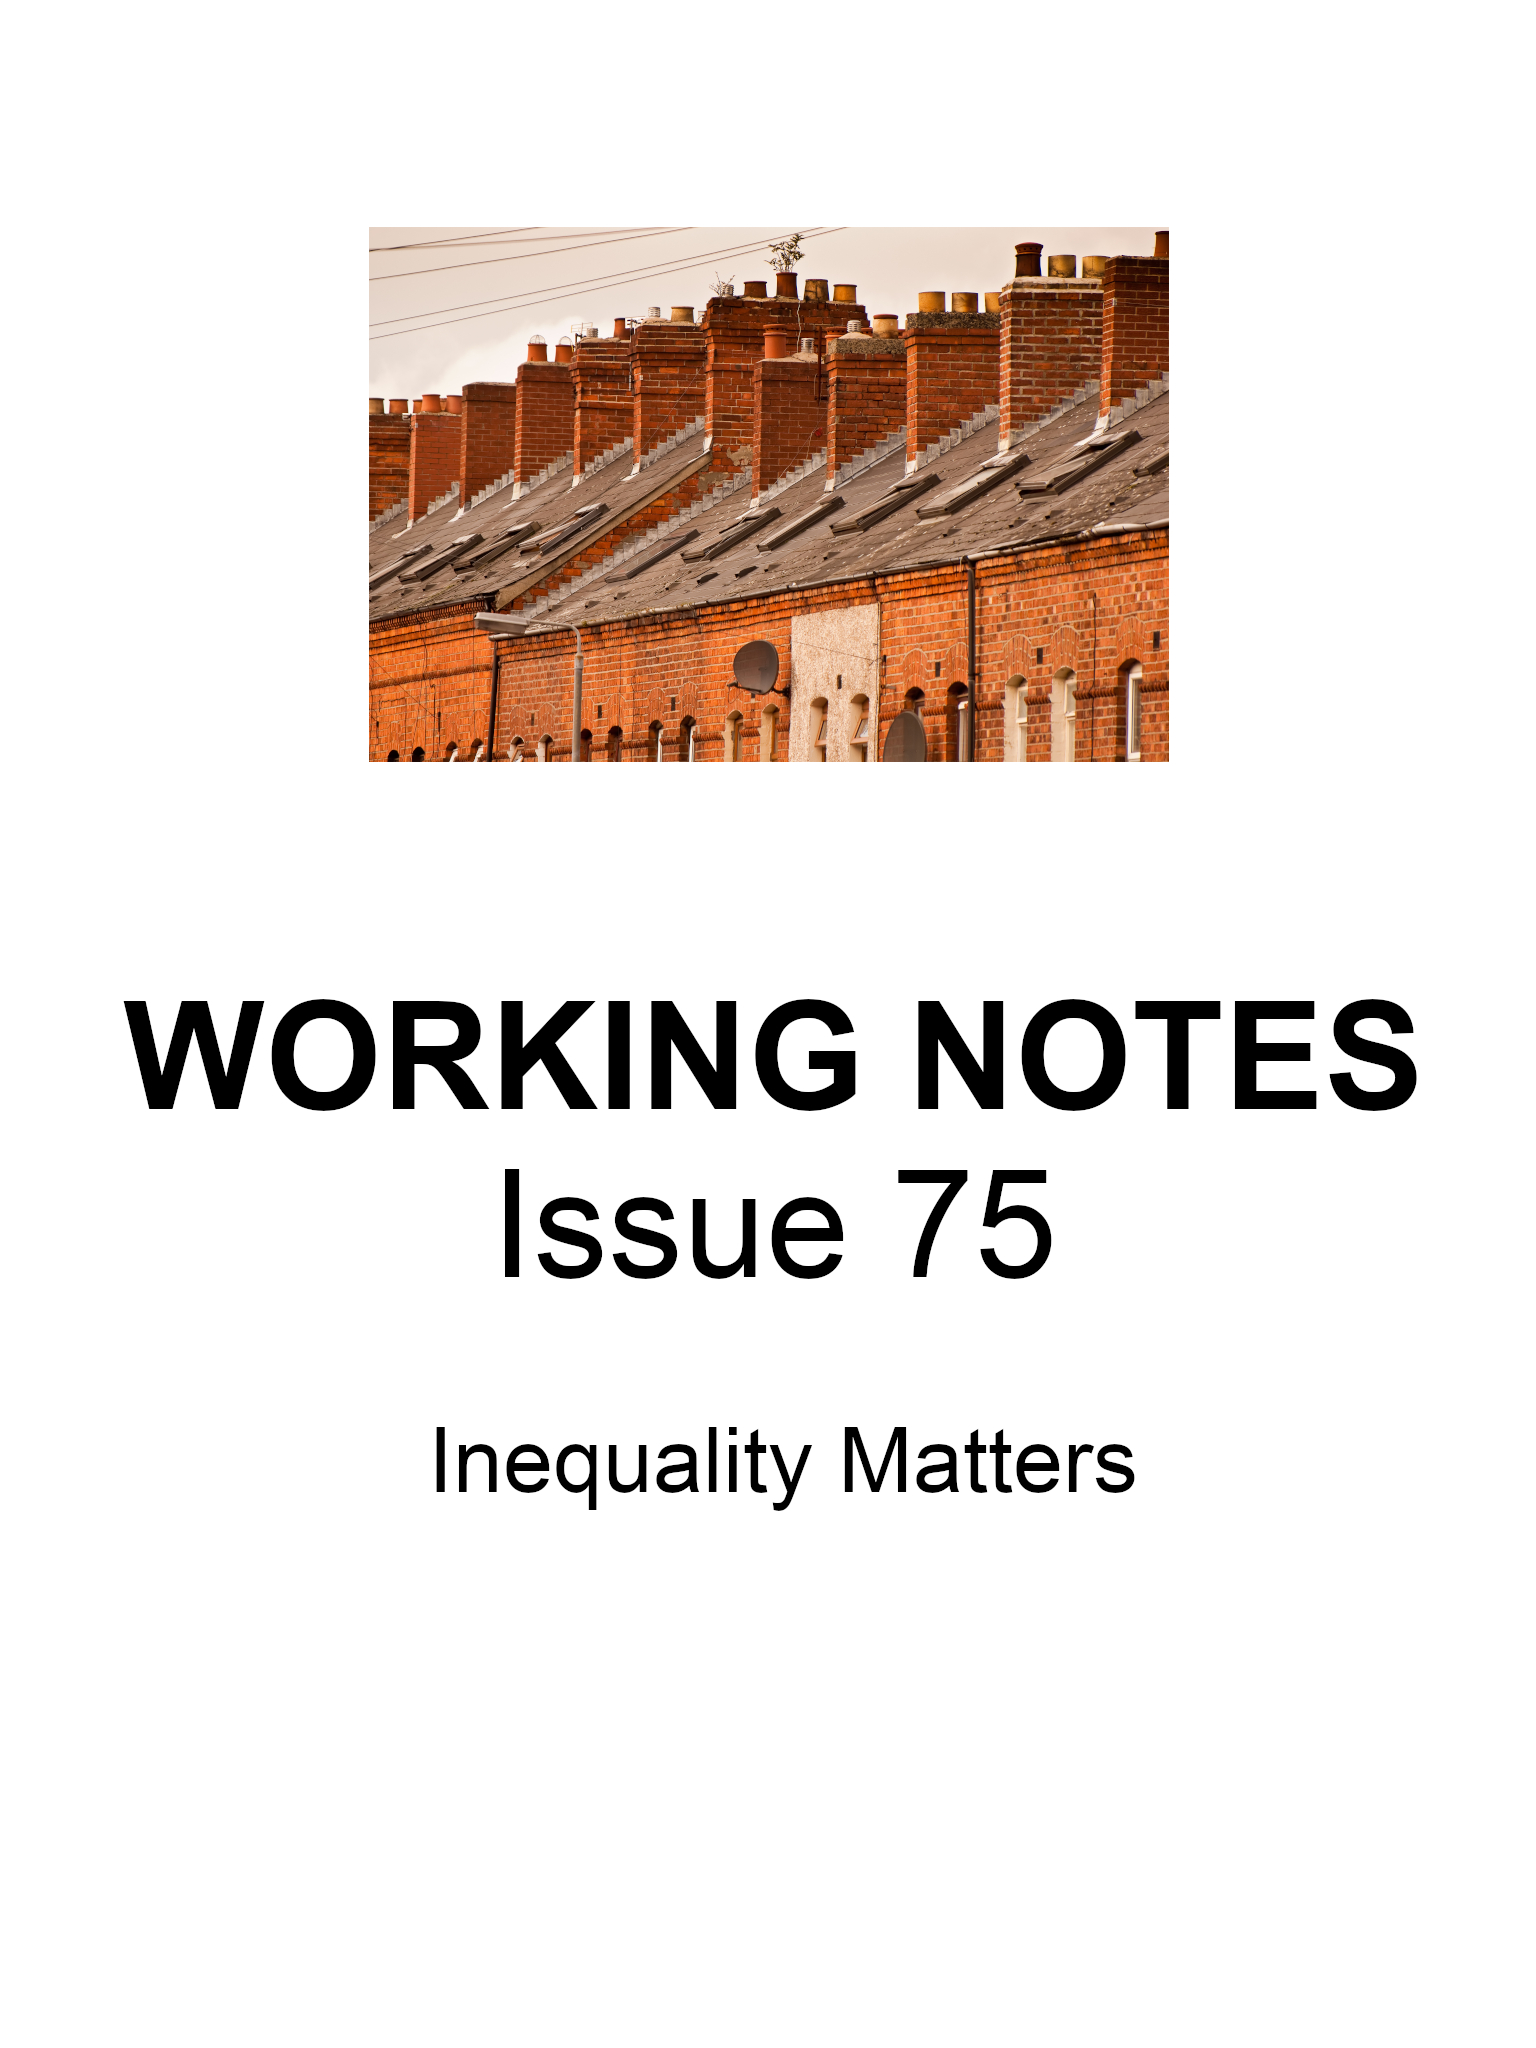 working-notes-issue-75